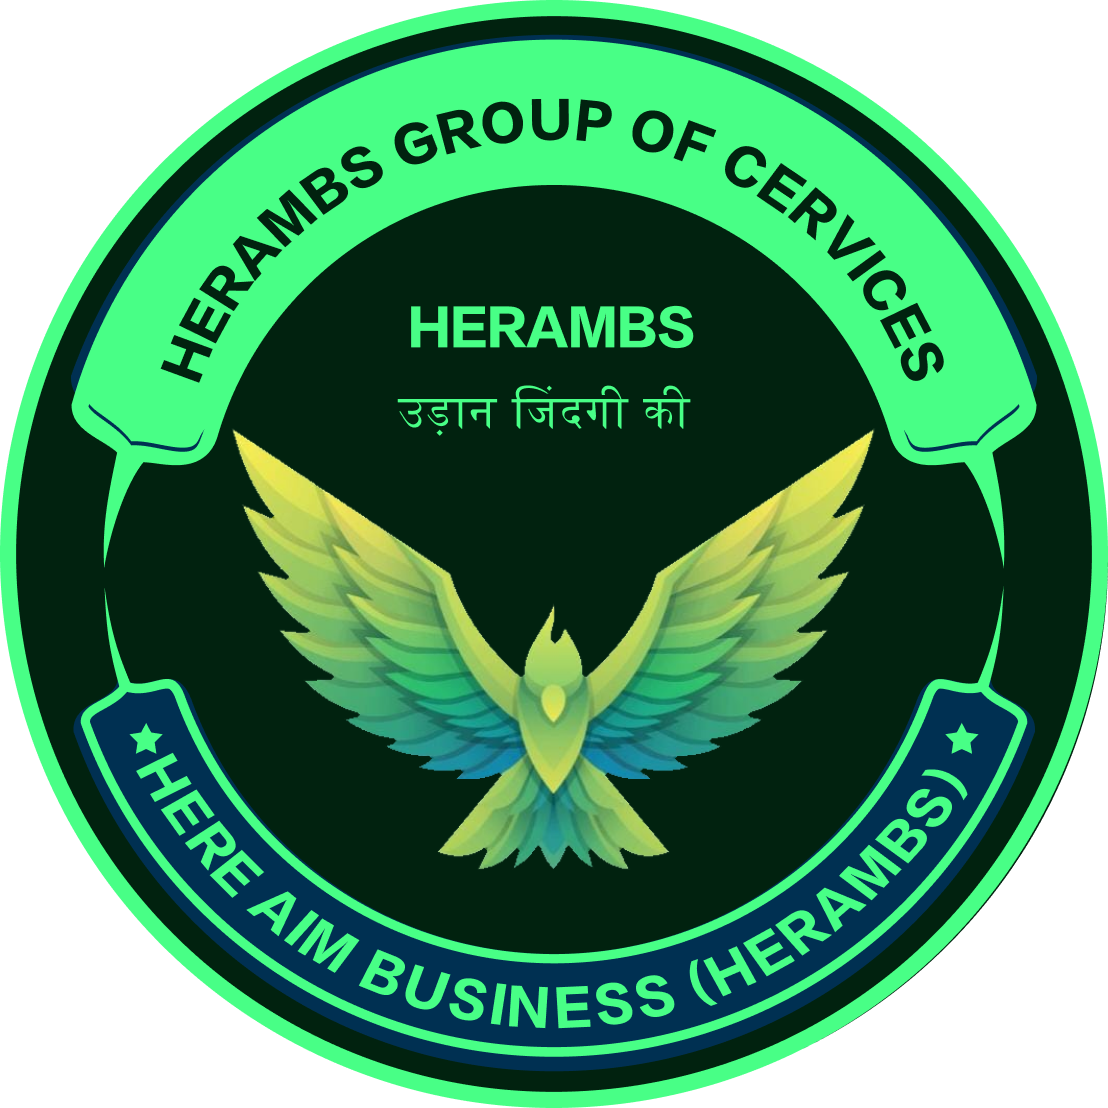 Herambs Group Of Services